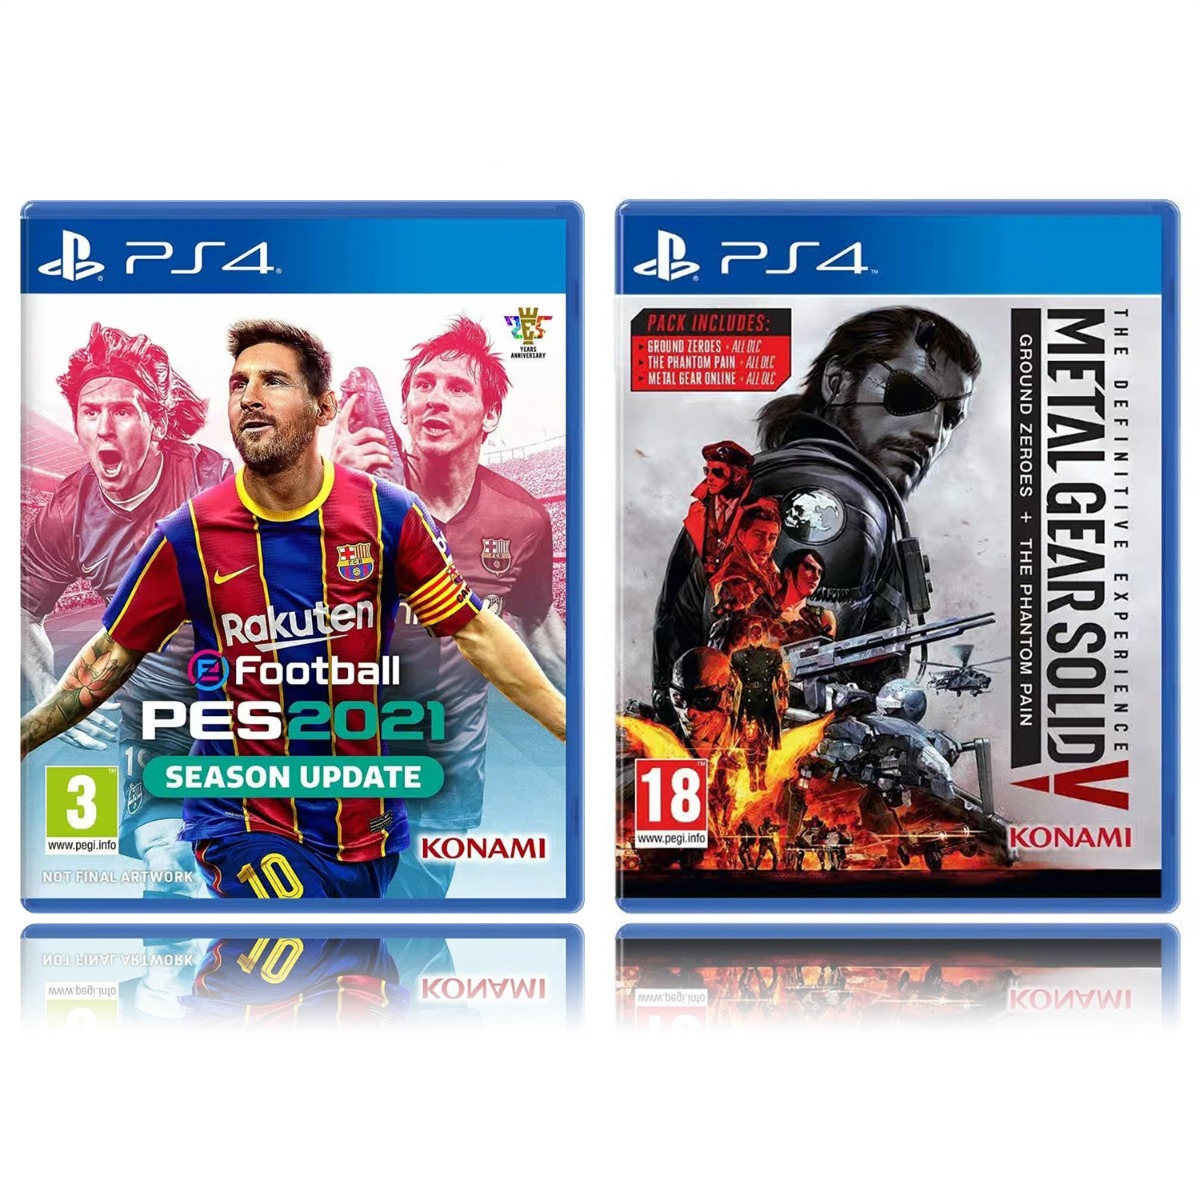 Metal Gear Solid V The Definitive Experience Game for PlayStation 4 with eFootball PES 2021 SEASON UPDATE for PlayStation 4